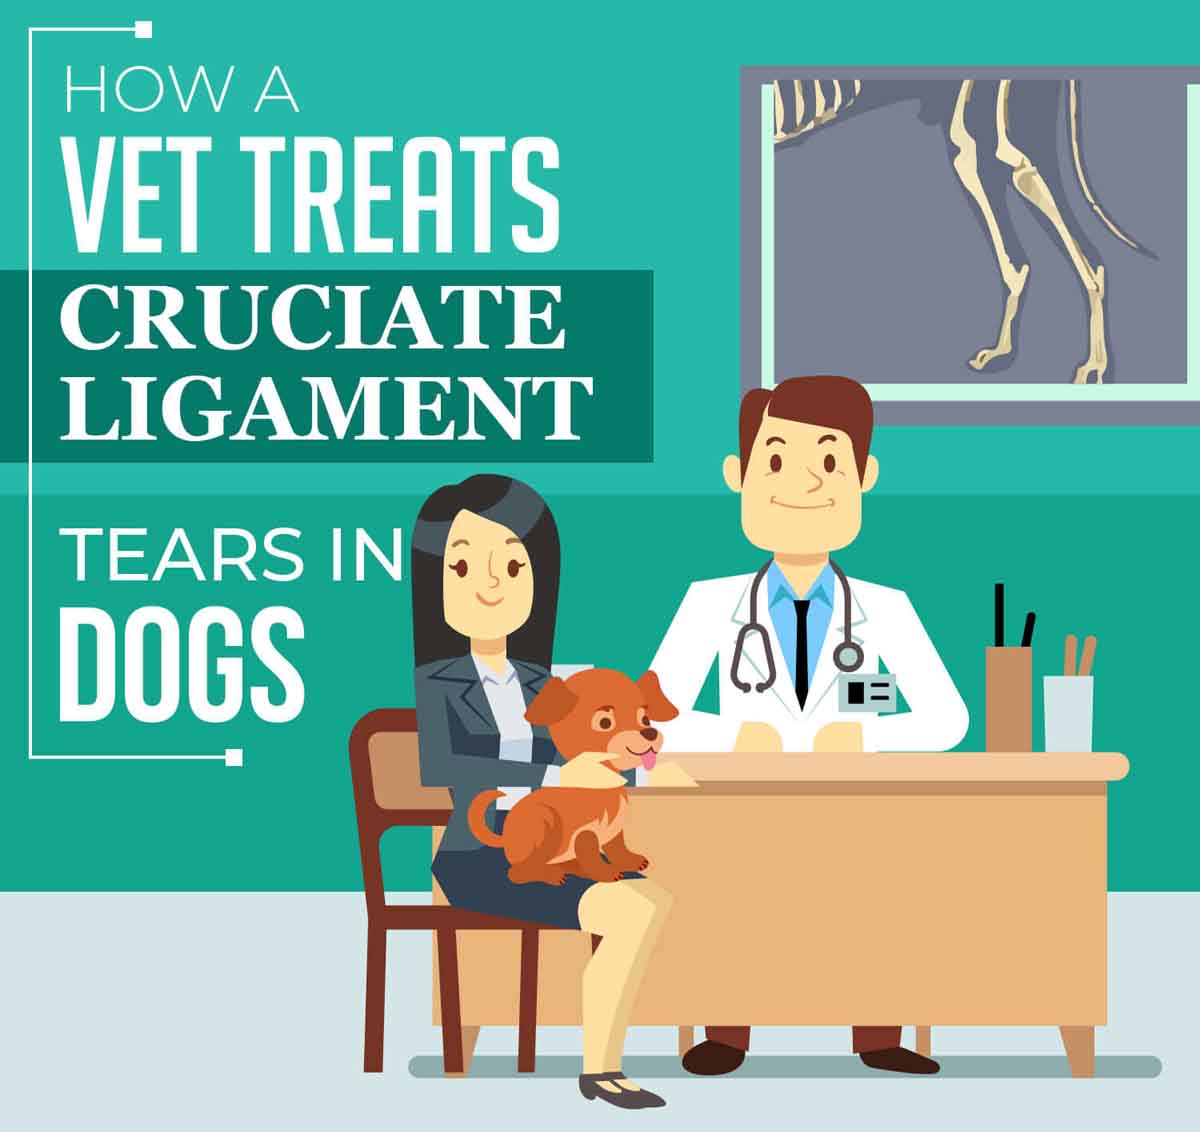 How a Vet Treats Cruciate Ligament Tears in Dogs